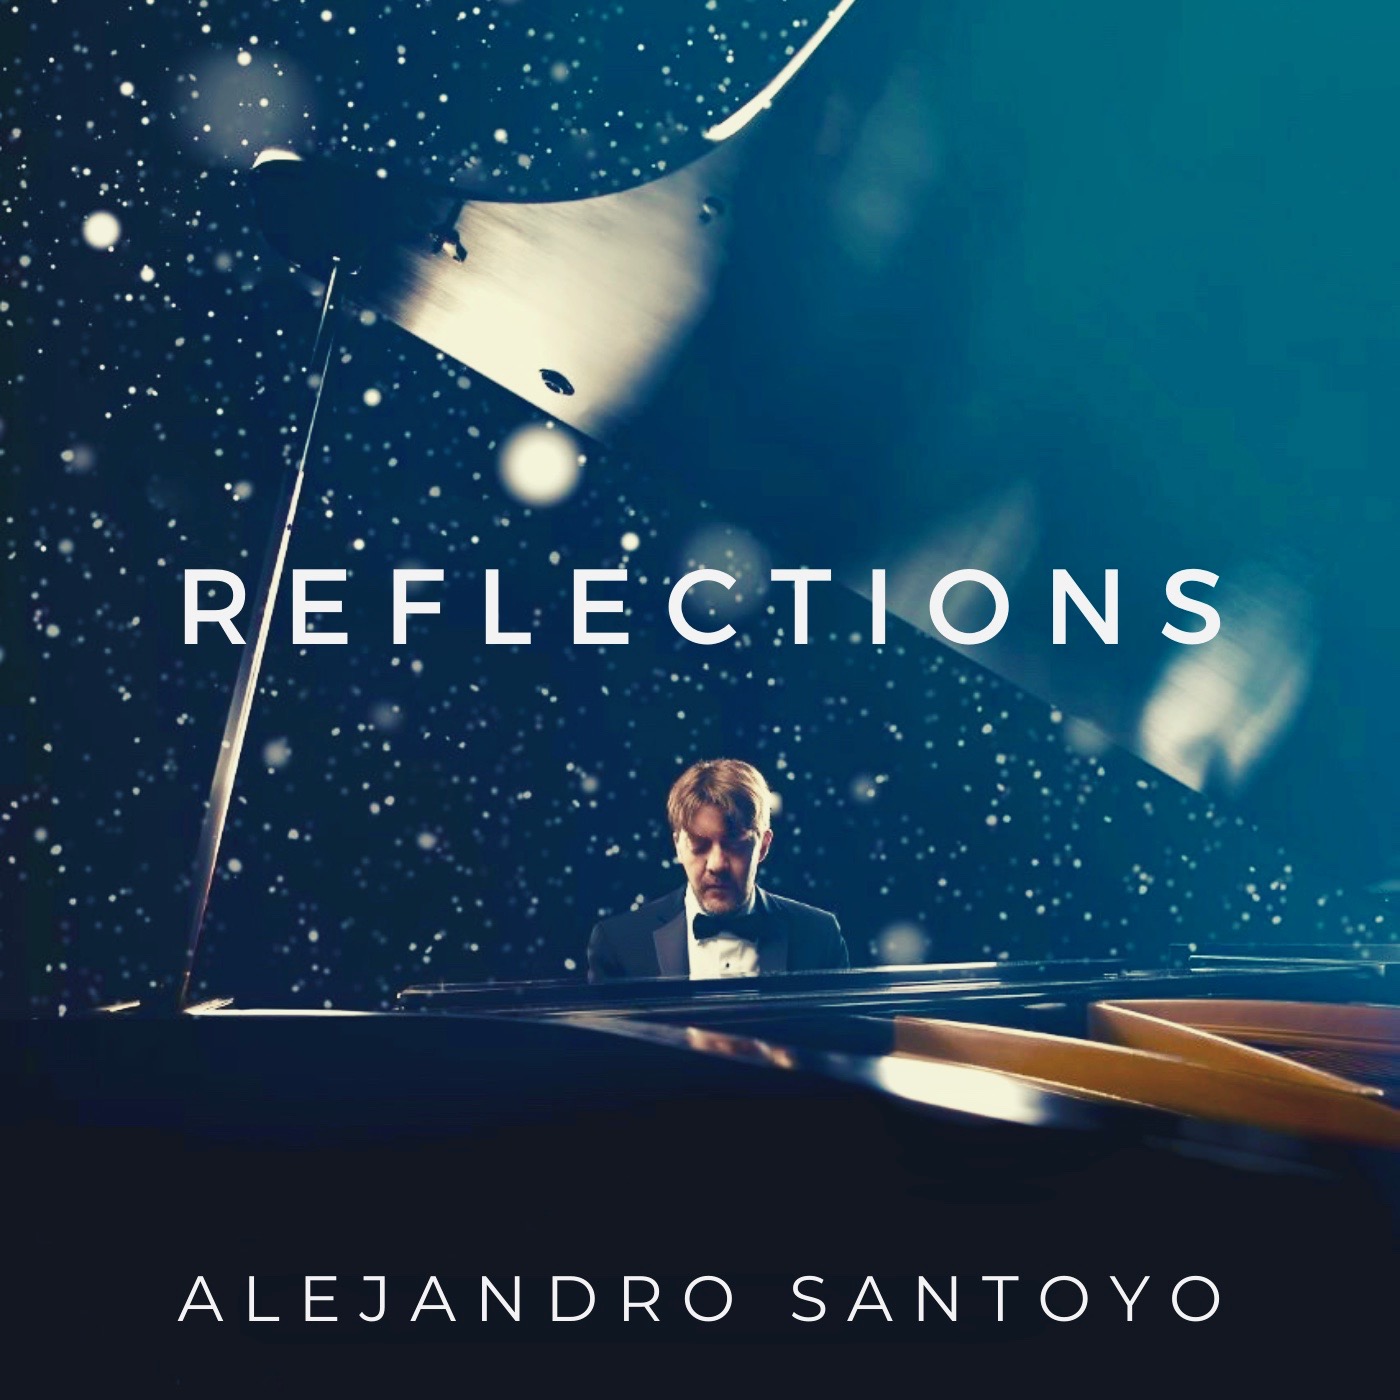 A Time to Reflect and Heal Through the Gentle Sounds of a Piano... New Album Release "Reflections" - Inspired by the COVID Confinement